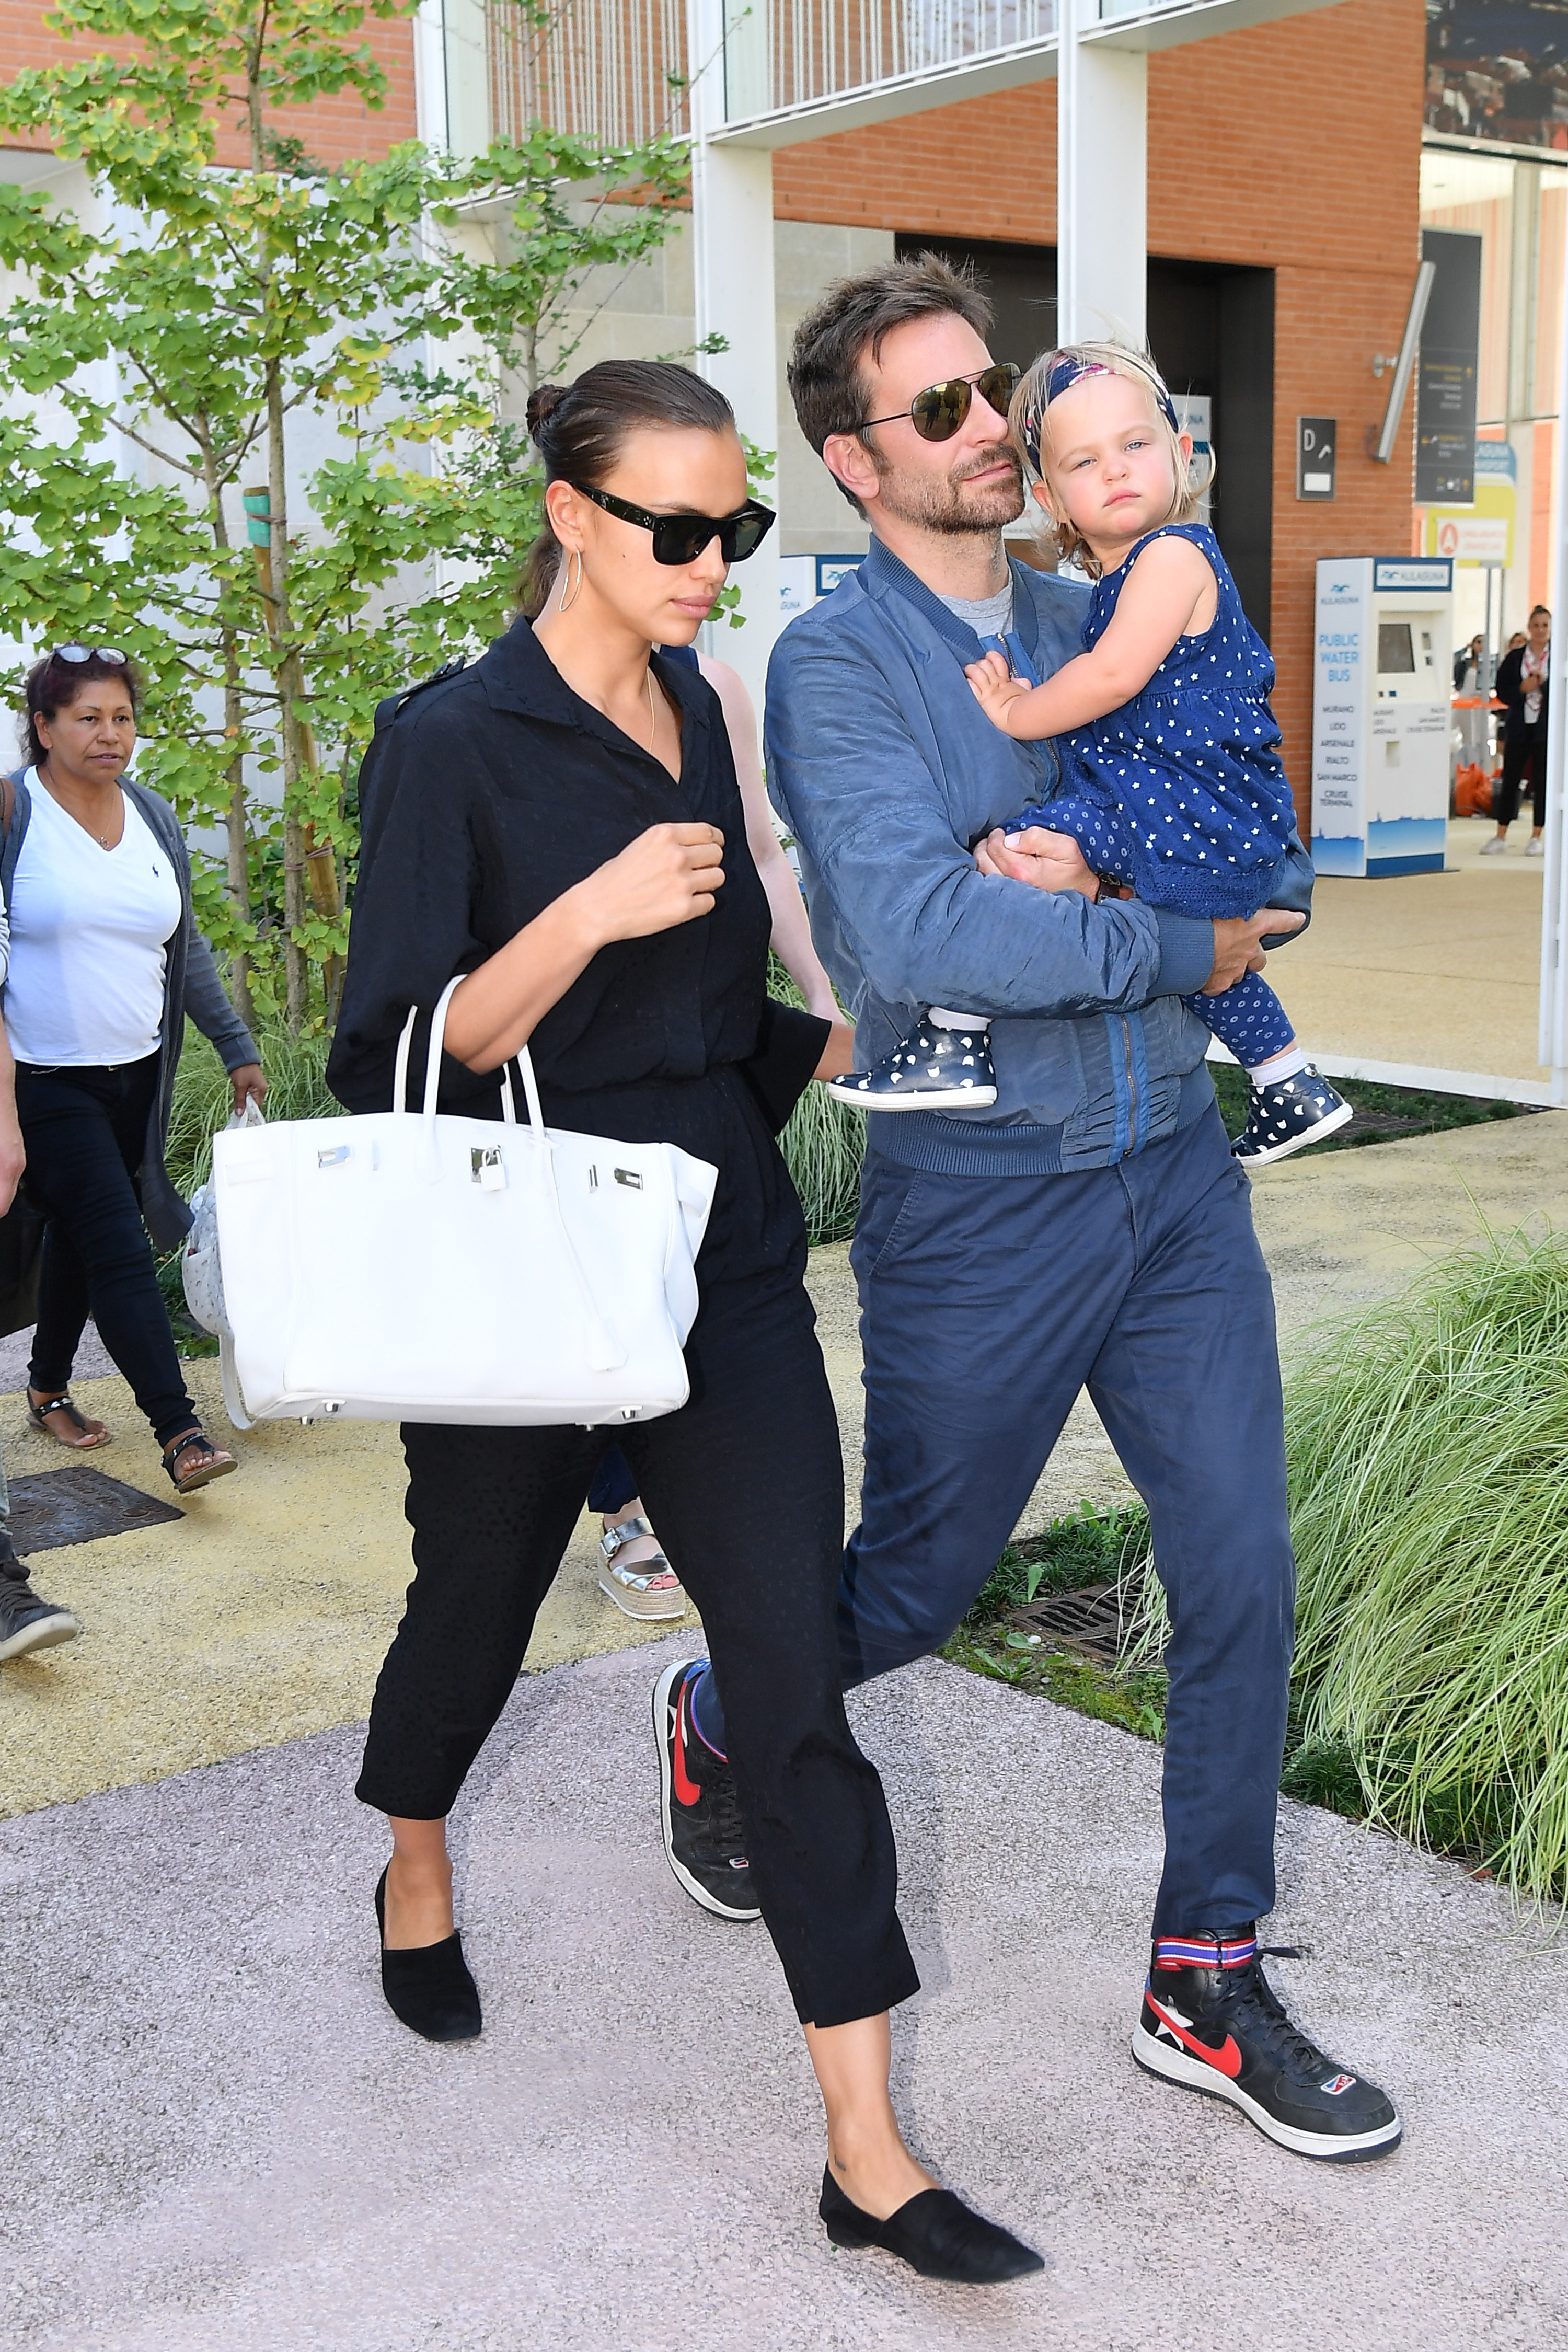 Bradley Cooper, Irina Shayk and their daughter Lea are seen arriving at the 75th Venice Film Festival on August 30, 2018 in Venice, Italy | Source: Getty Images